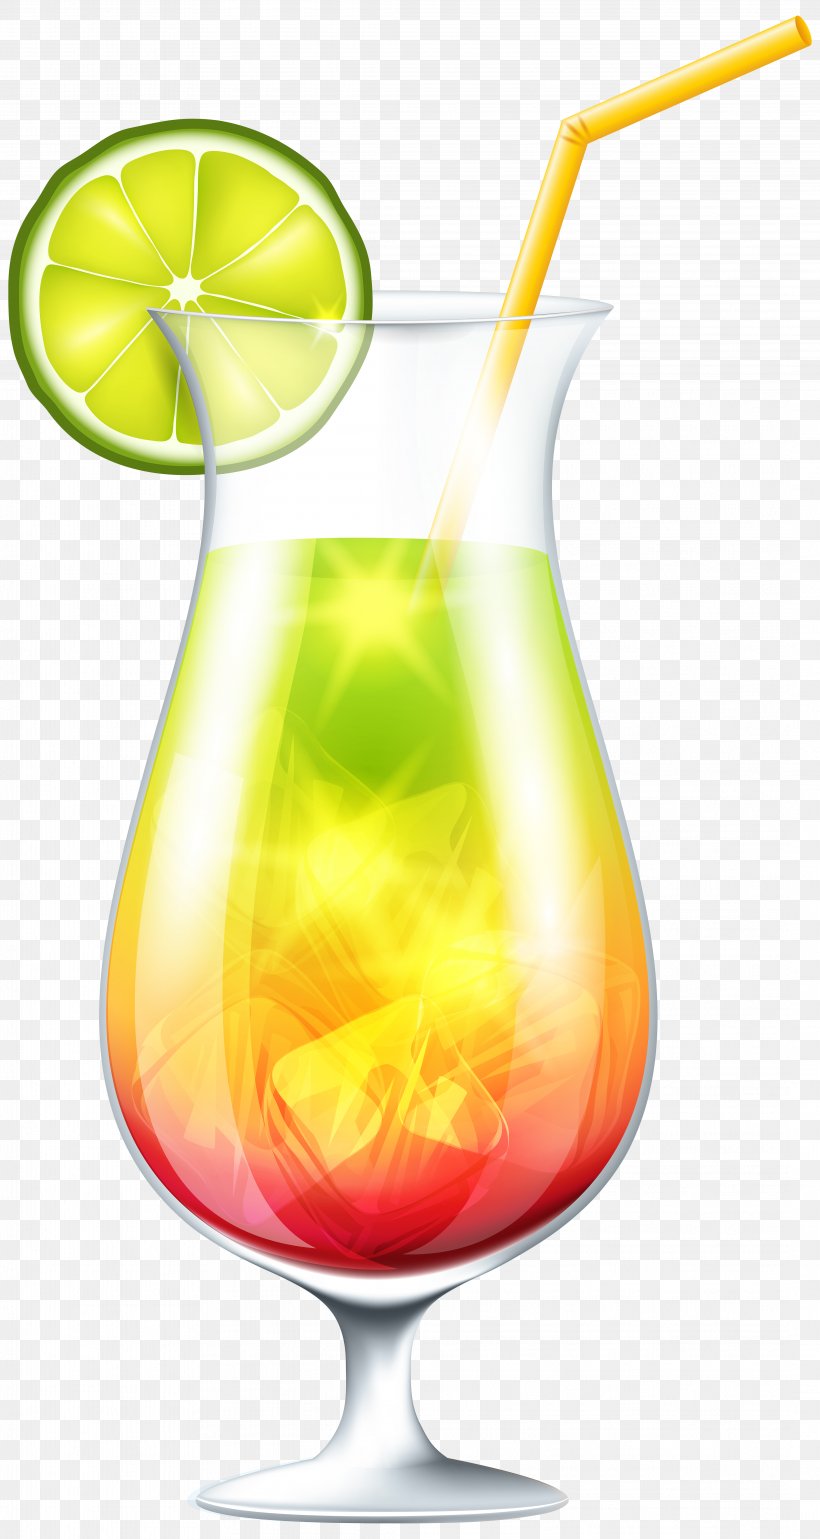 Cocktail Tea Alcoholic Drink Clip Art, PNG, 4262x8000px, Cocktail, Alcoholic Drink, Cocktail Garnish, Cocktail Umbrella, Drink Download Free